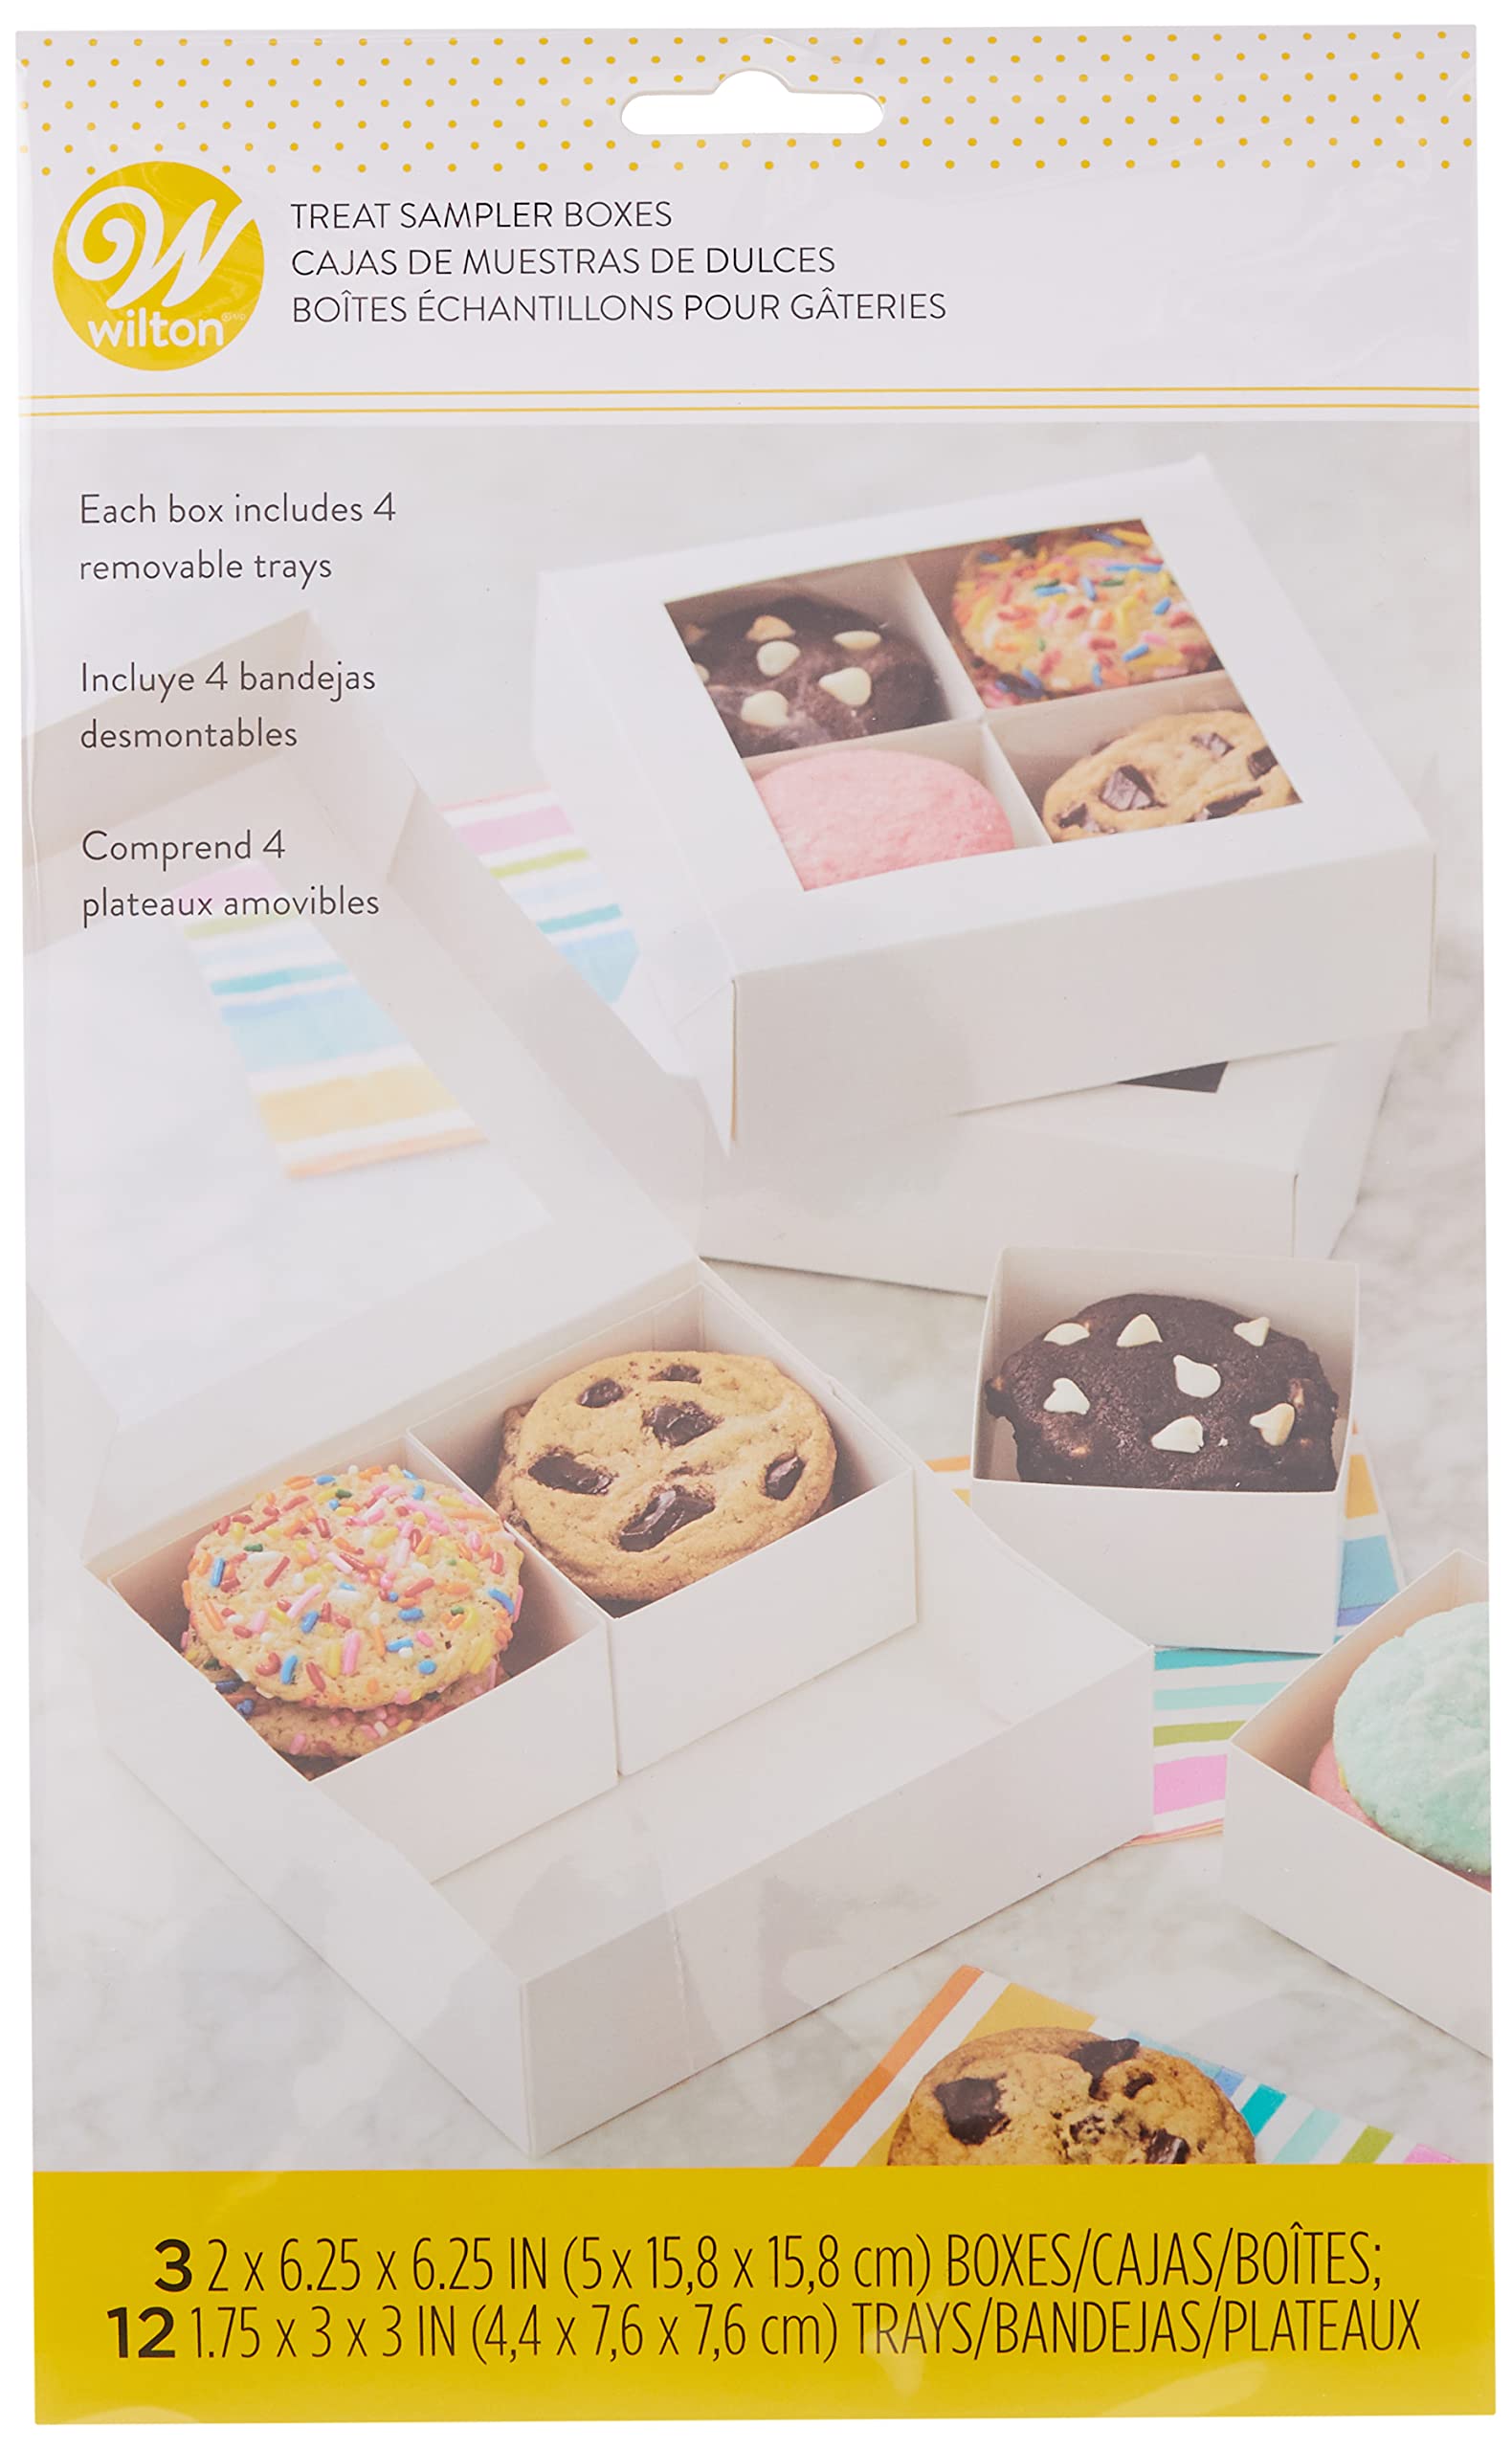 Wilton Treat Sampler Boxes, Perfect for Sharing homemade Desserts, Cookies and Snacks as a Gift, Each Box has 4-Compartments, Includes 3-Boxes, White